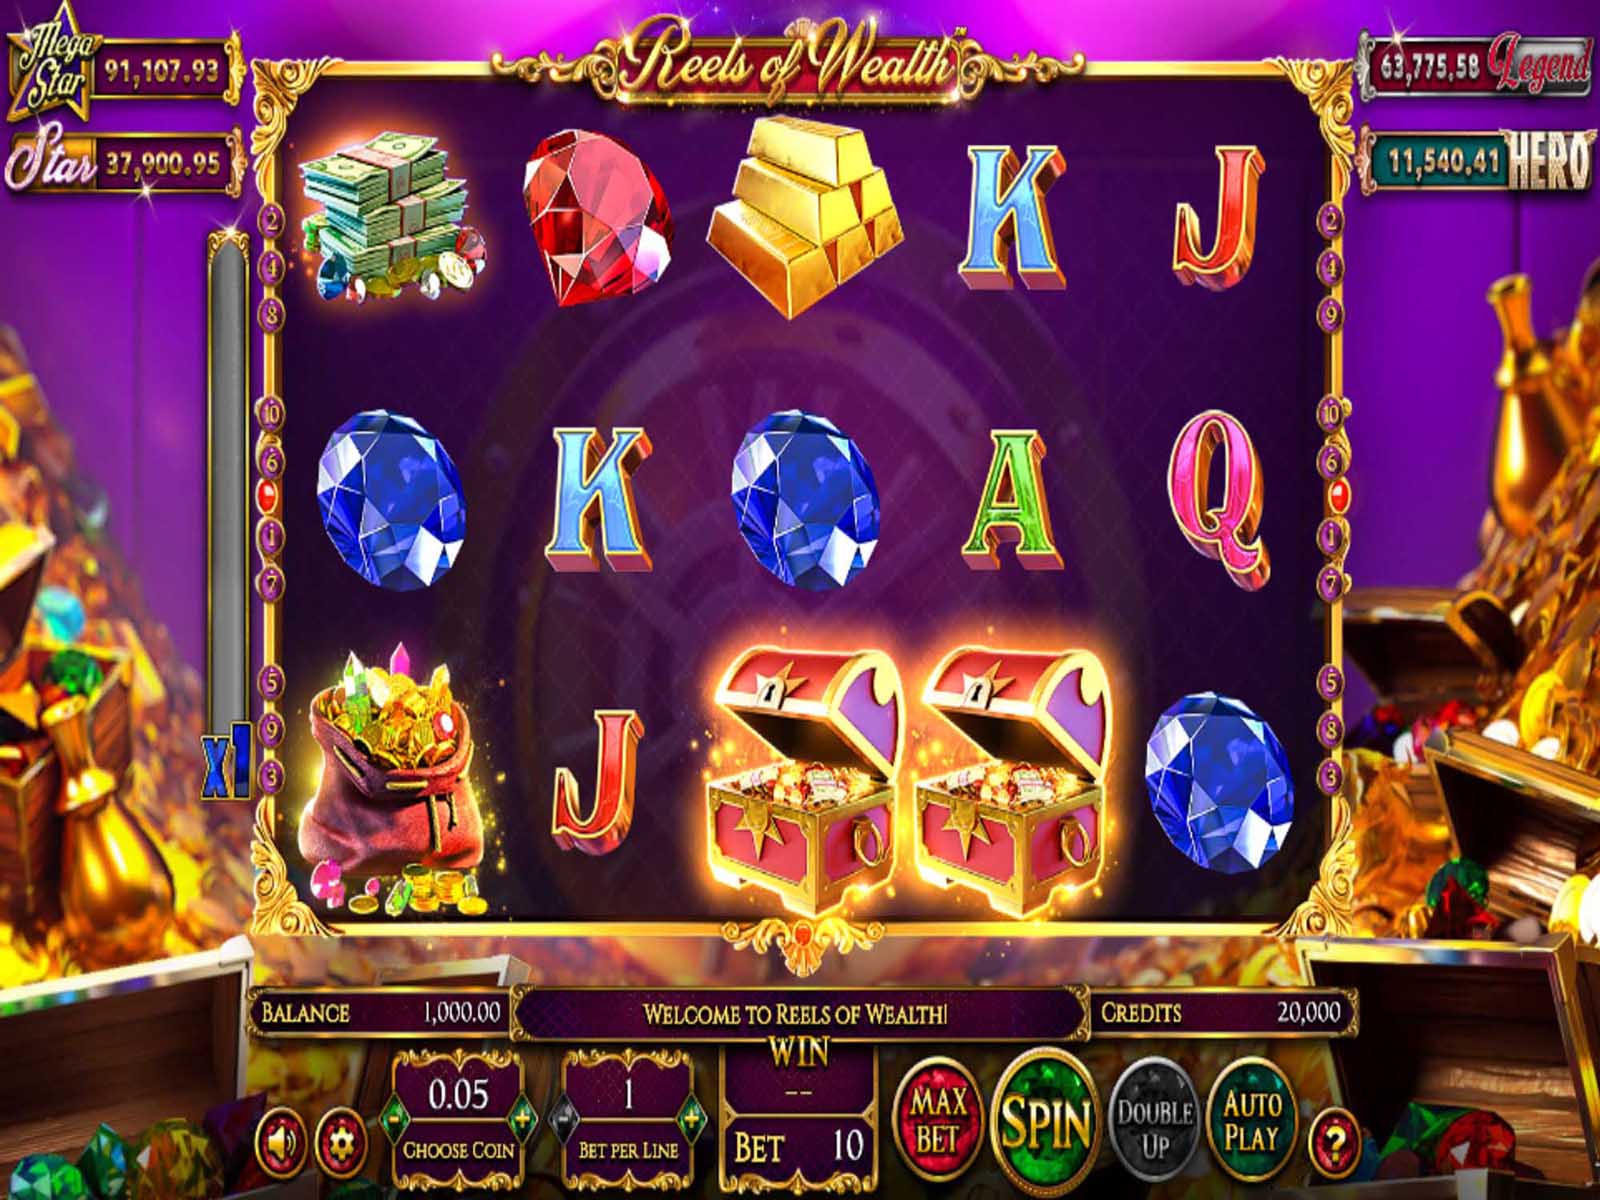 If you're looking for online slots you can play for real money, we got you covered. Here's the best ones to try out.